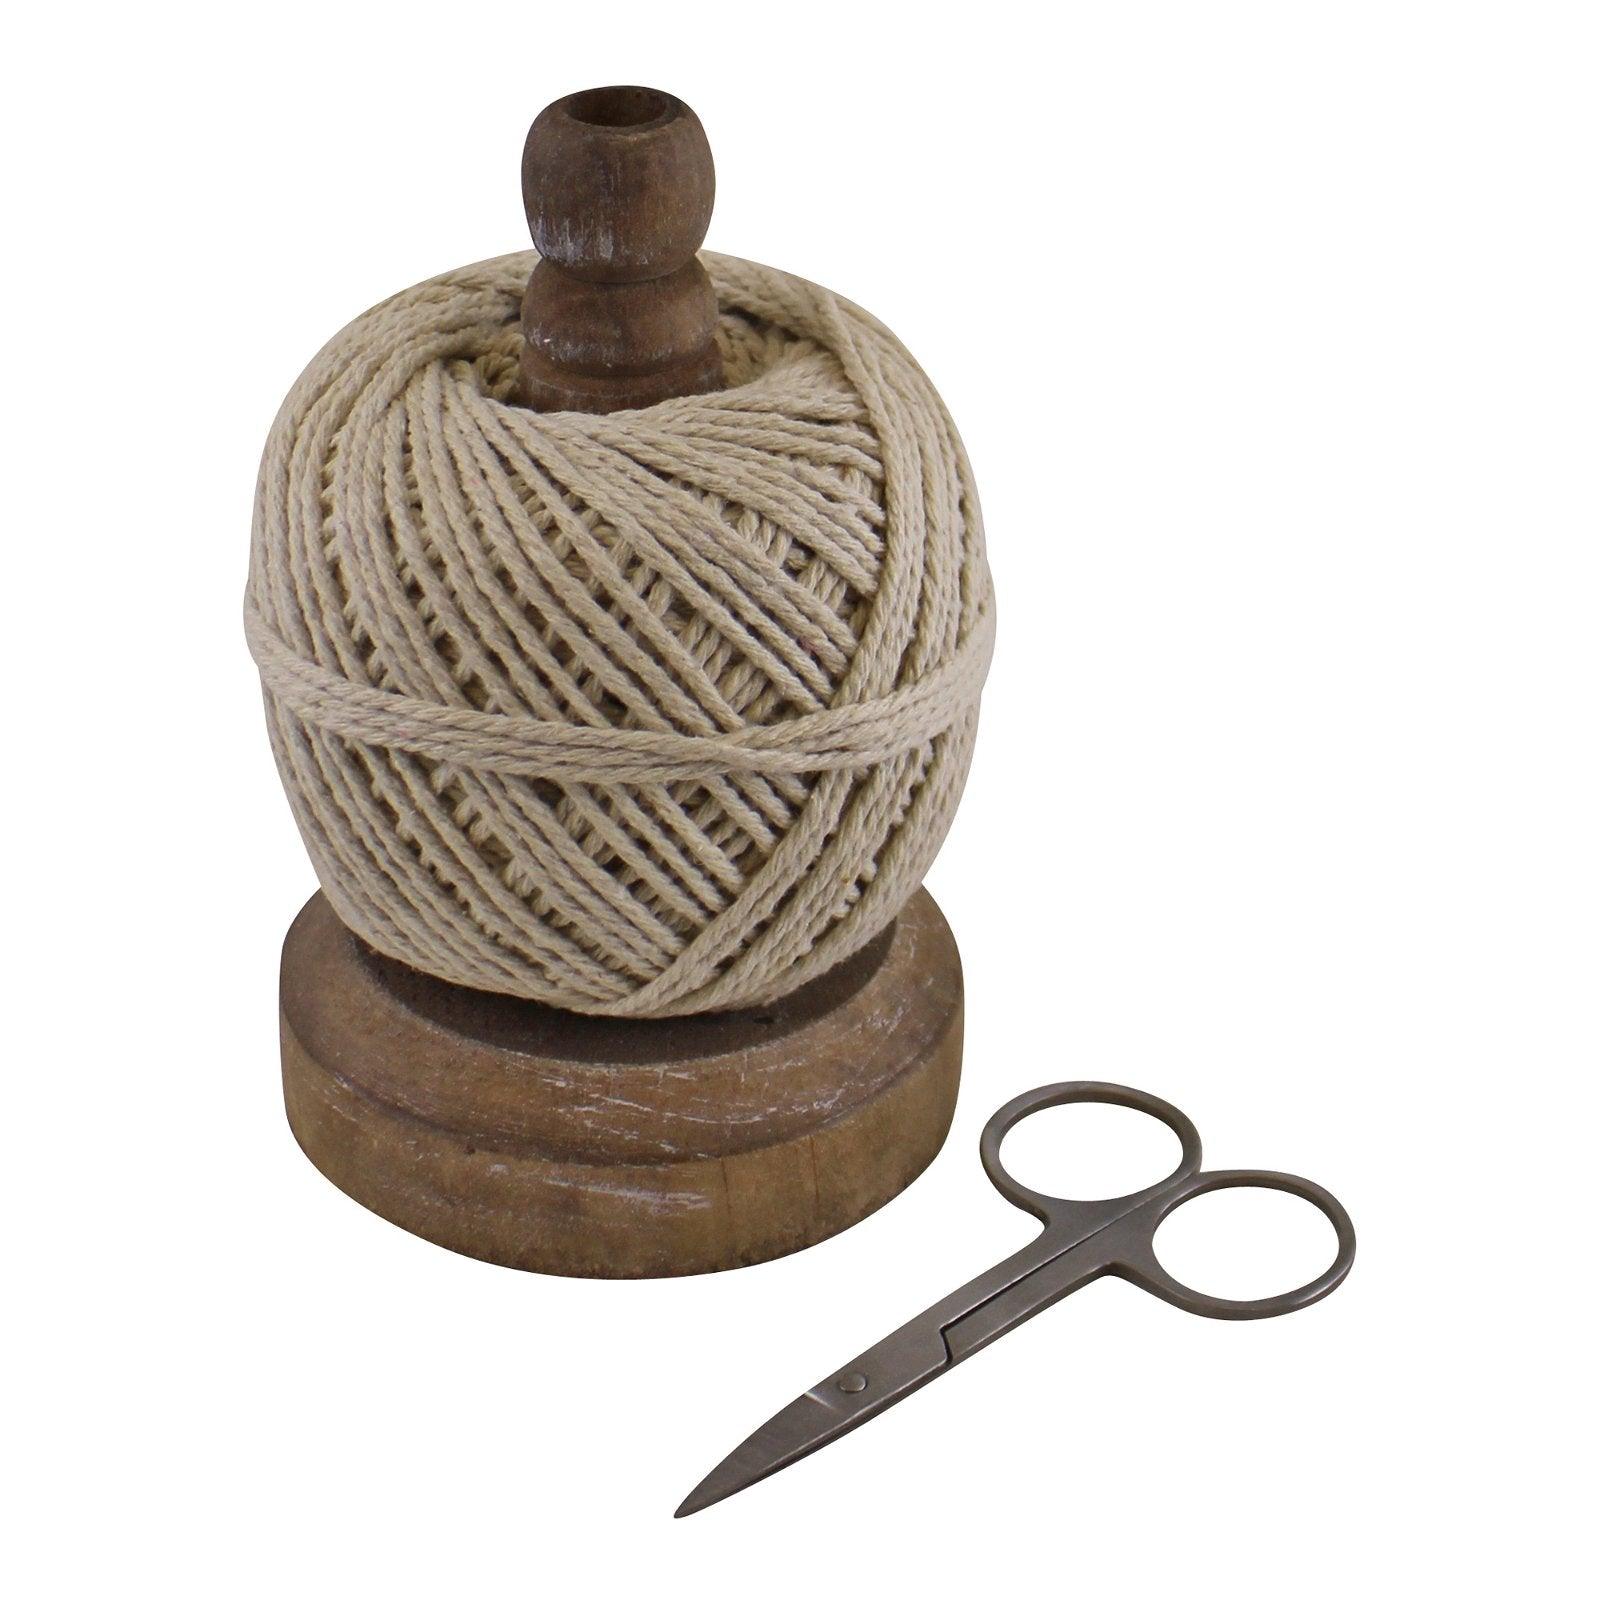 View Craft Ball Of String On Stand With Scissors information